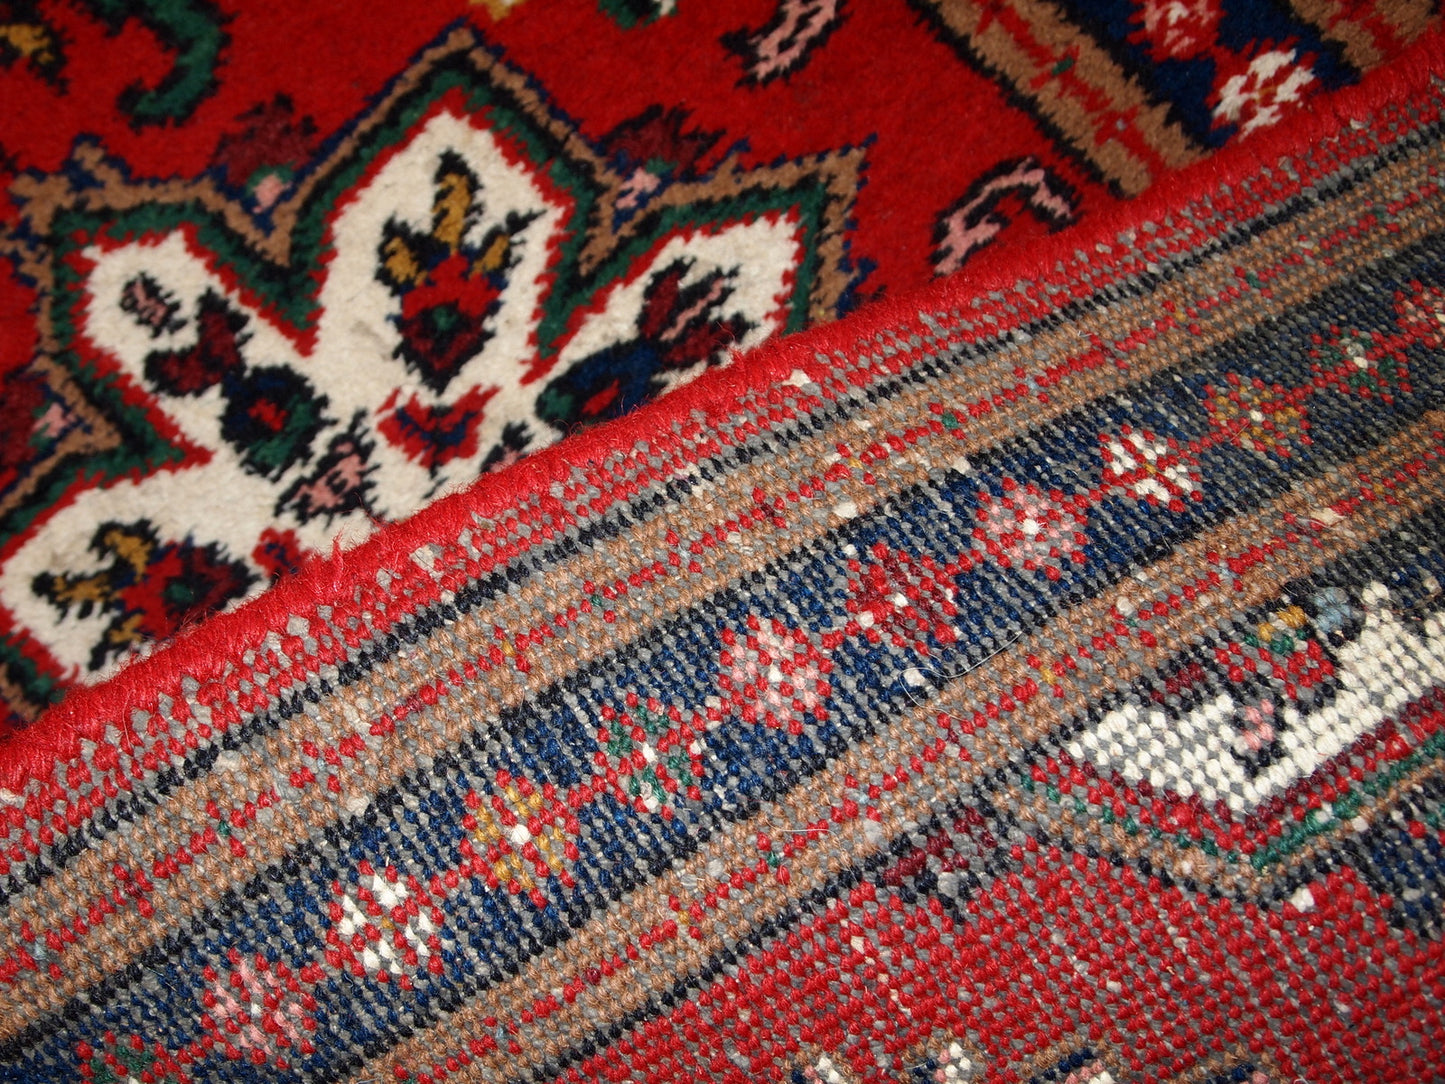 Handmade vintage Middle Eastern rug in traditional floral design. The rug is from the end of 20th century in original good condition.